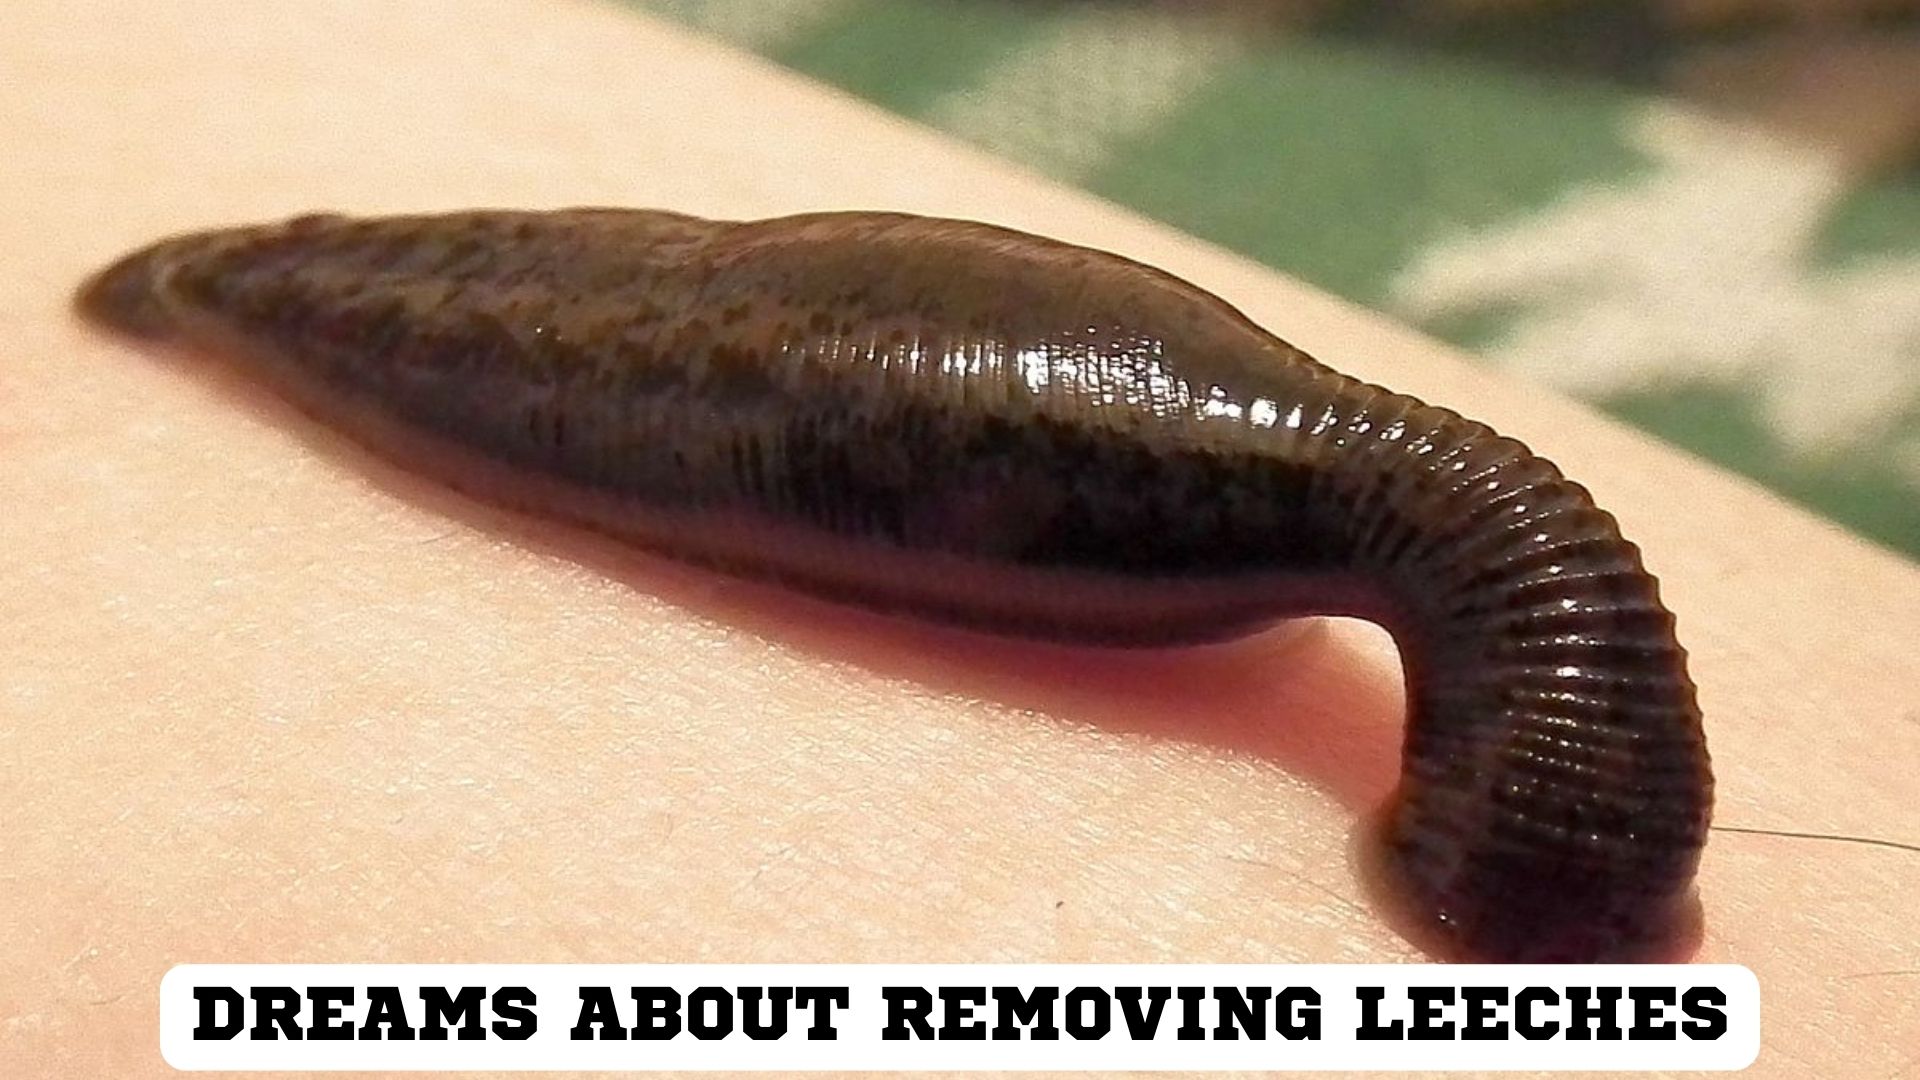 Dreams About Removing Leeches - A Signal For Weakness Or Subtlety